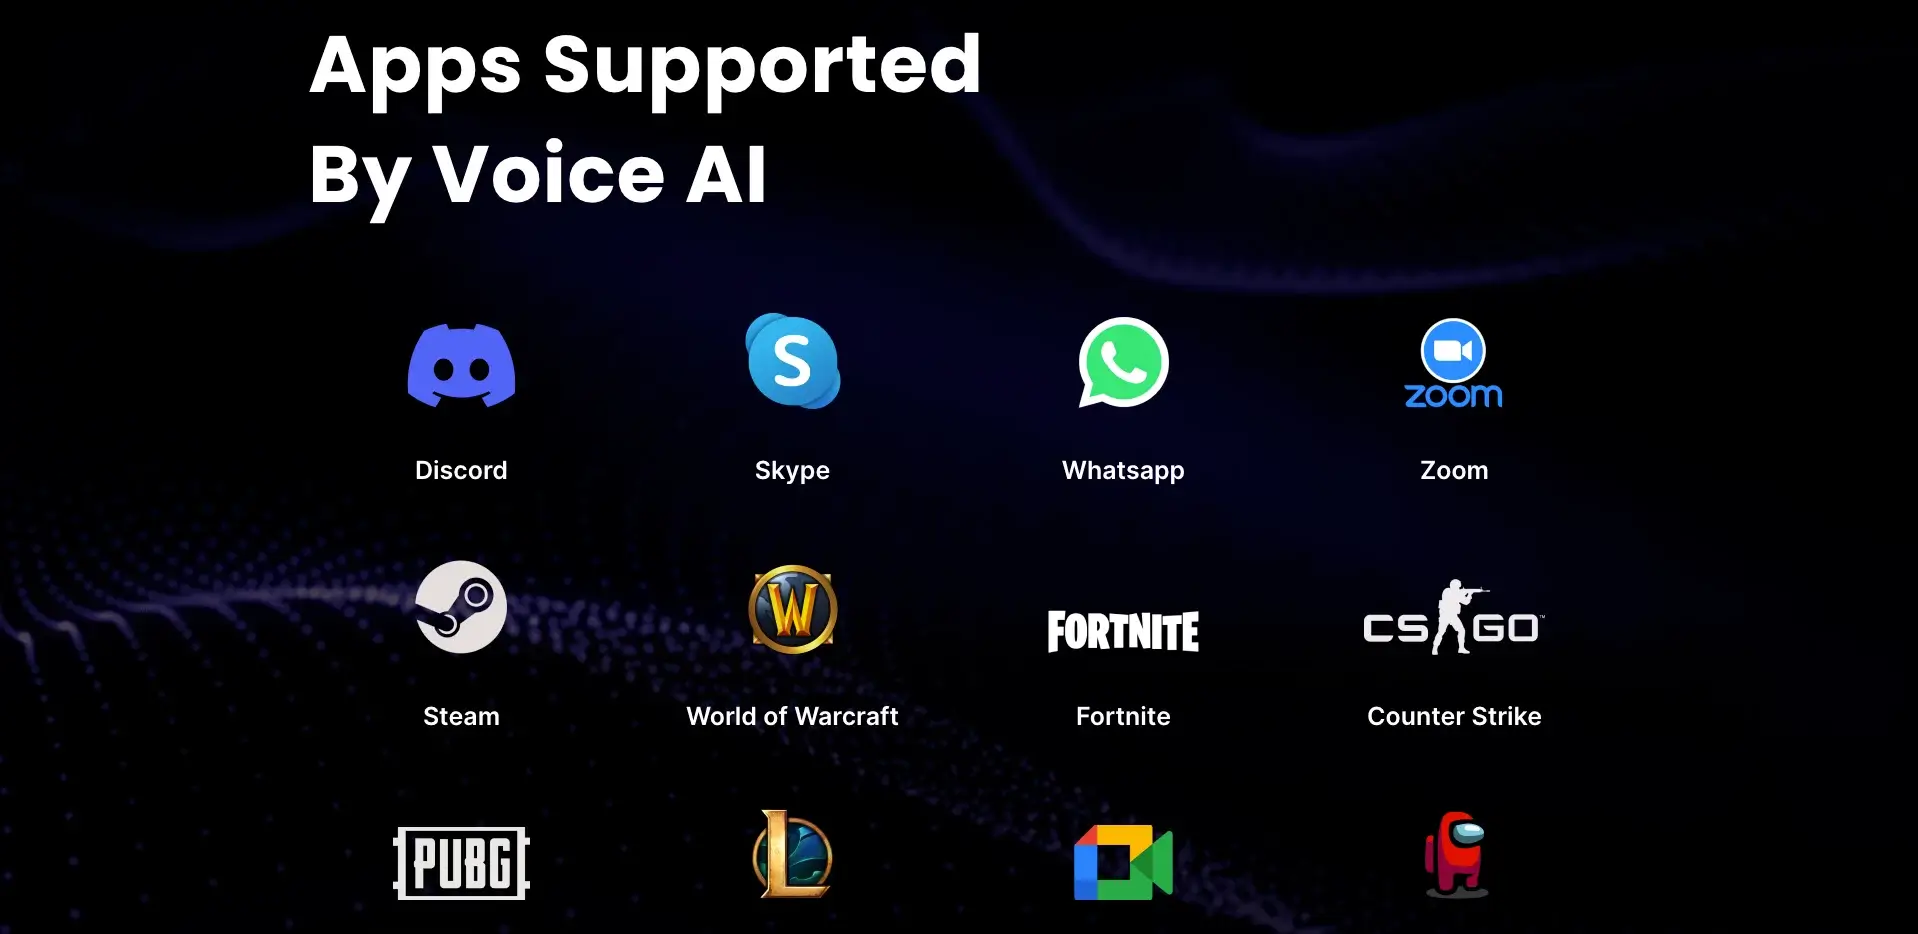 Voice AI - Supported Apps